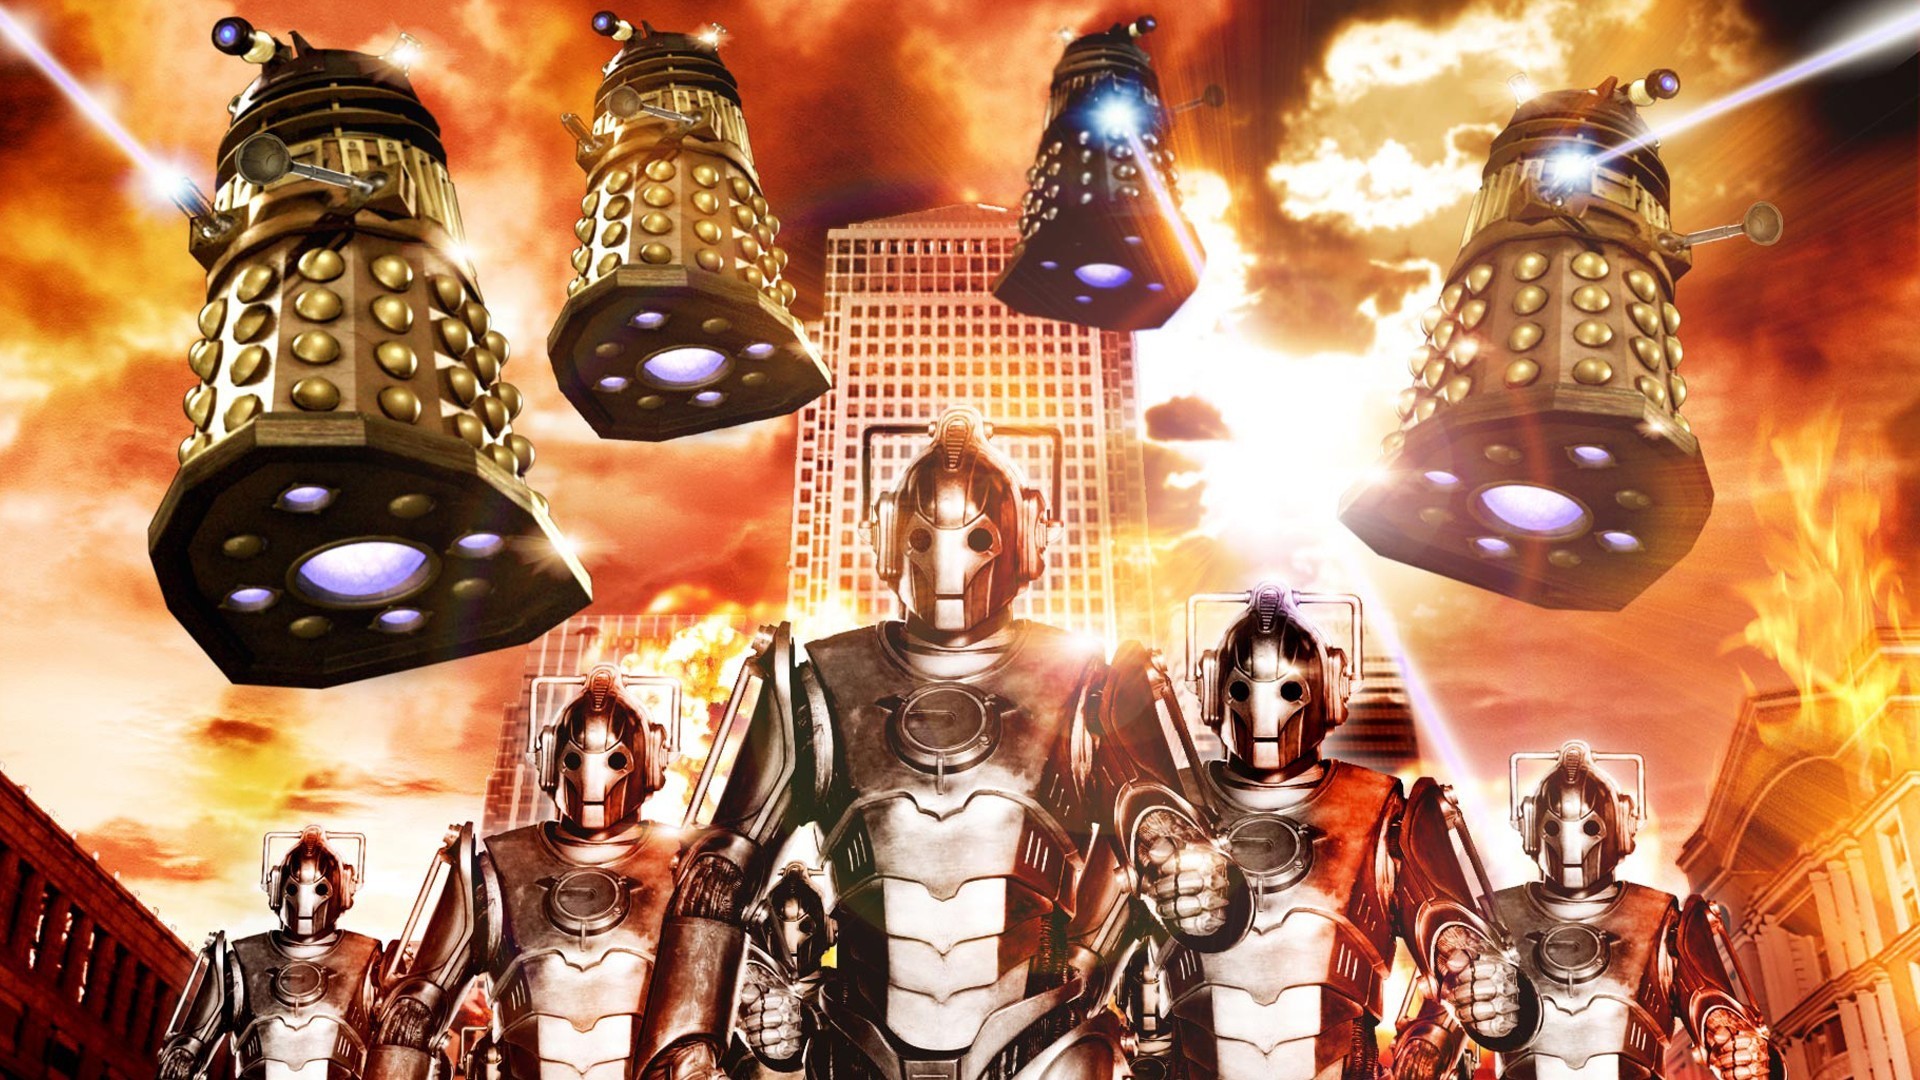 1920x1080 Doomsday - Doctor Who wallpaper - Free Wide HD Wallpaper